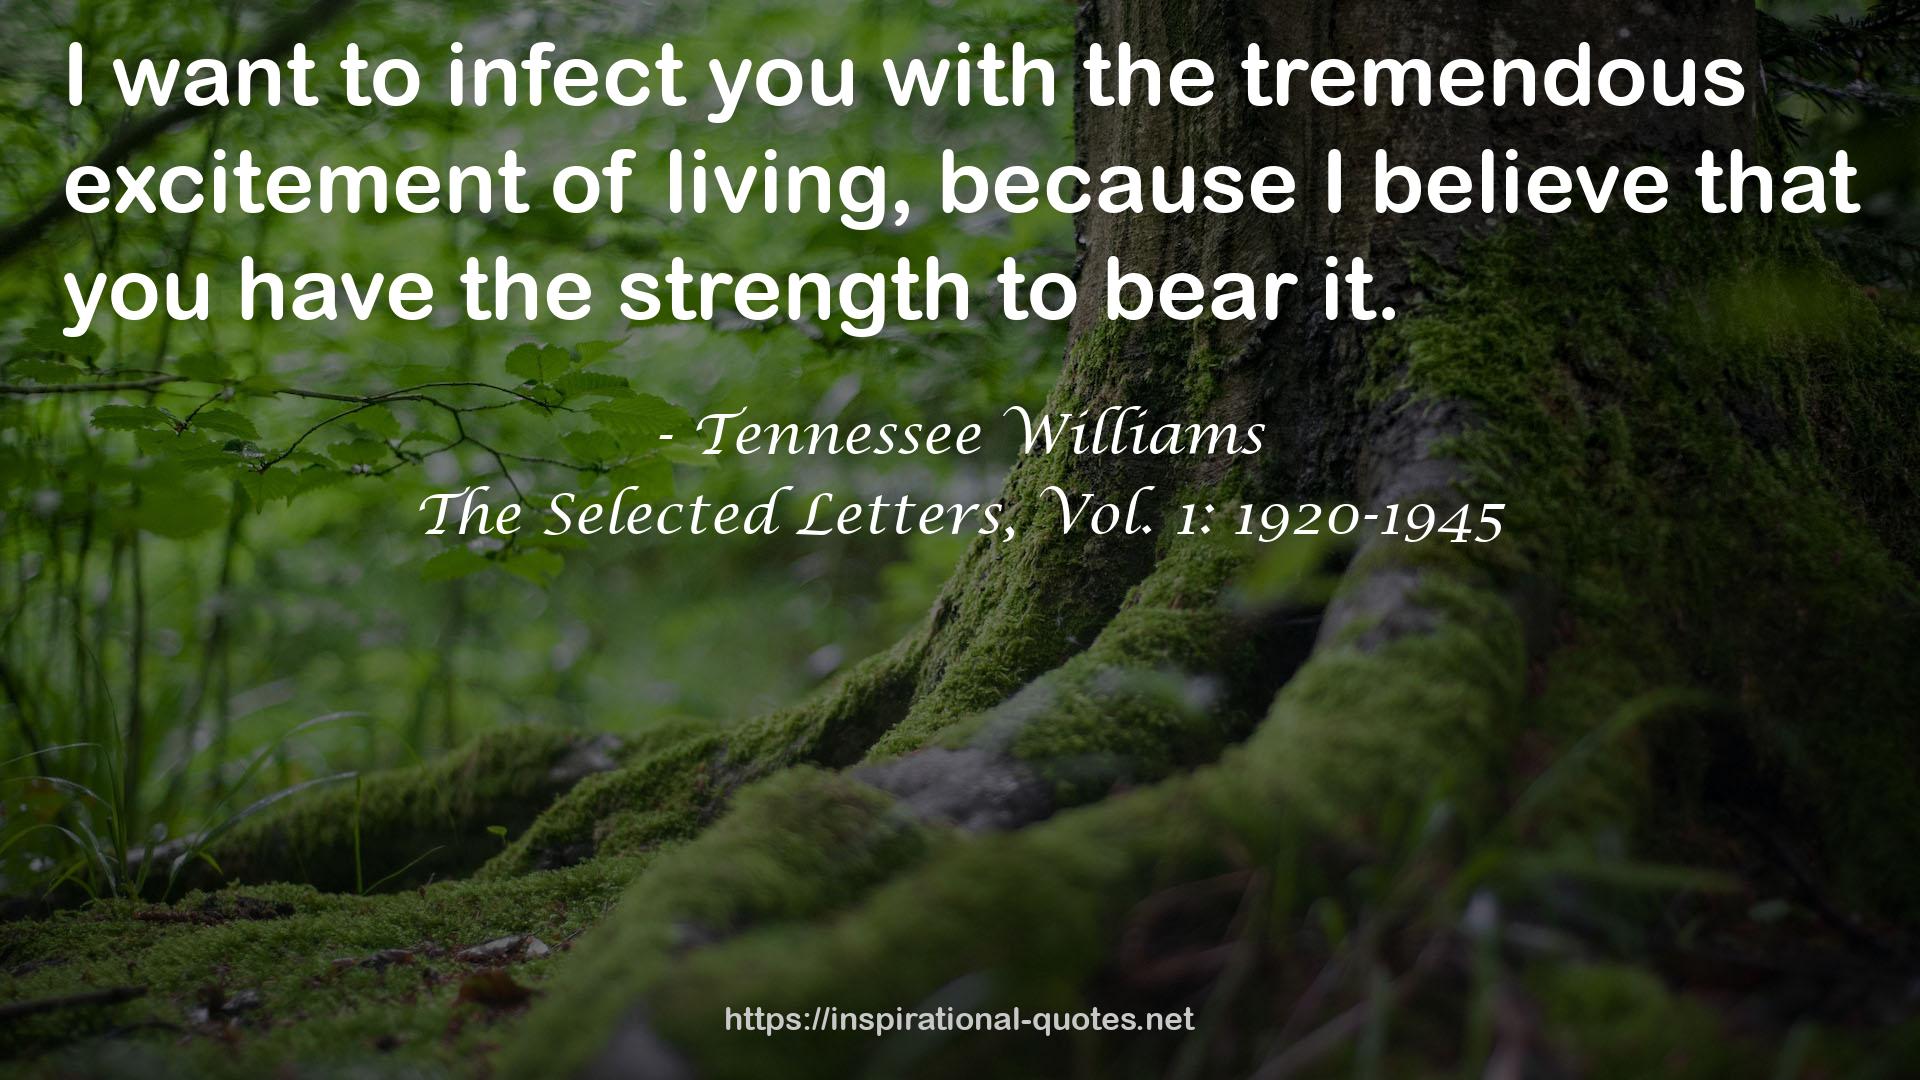 The Selected Letters, Vol. 1: 1920-1945 QUOTES